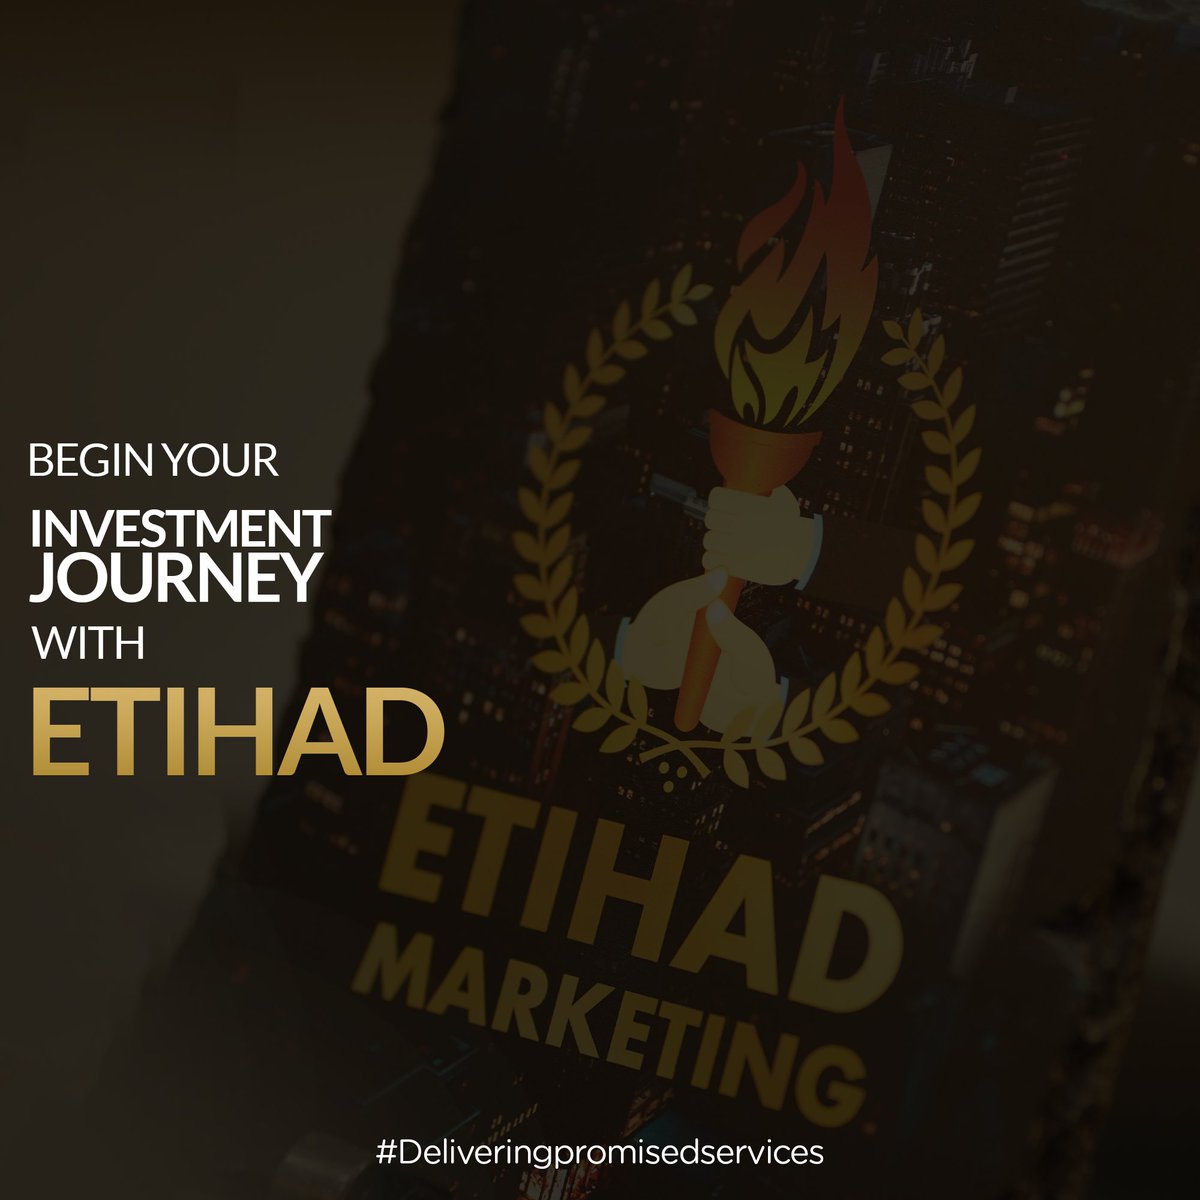 Embark on your investment journey with Etihad Marketing, where opportunities meet expertise. Explore a world of tailored investment solutions designed to guide you towards financial success and growth. 
-
#etihadmarketing #InvestWithEtihad #EtihadInvestments #BeginYourJourney